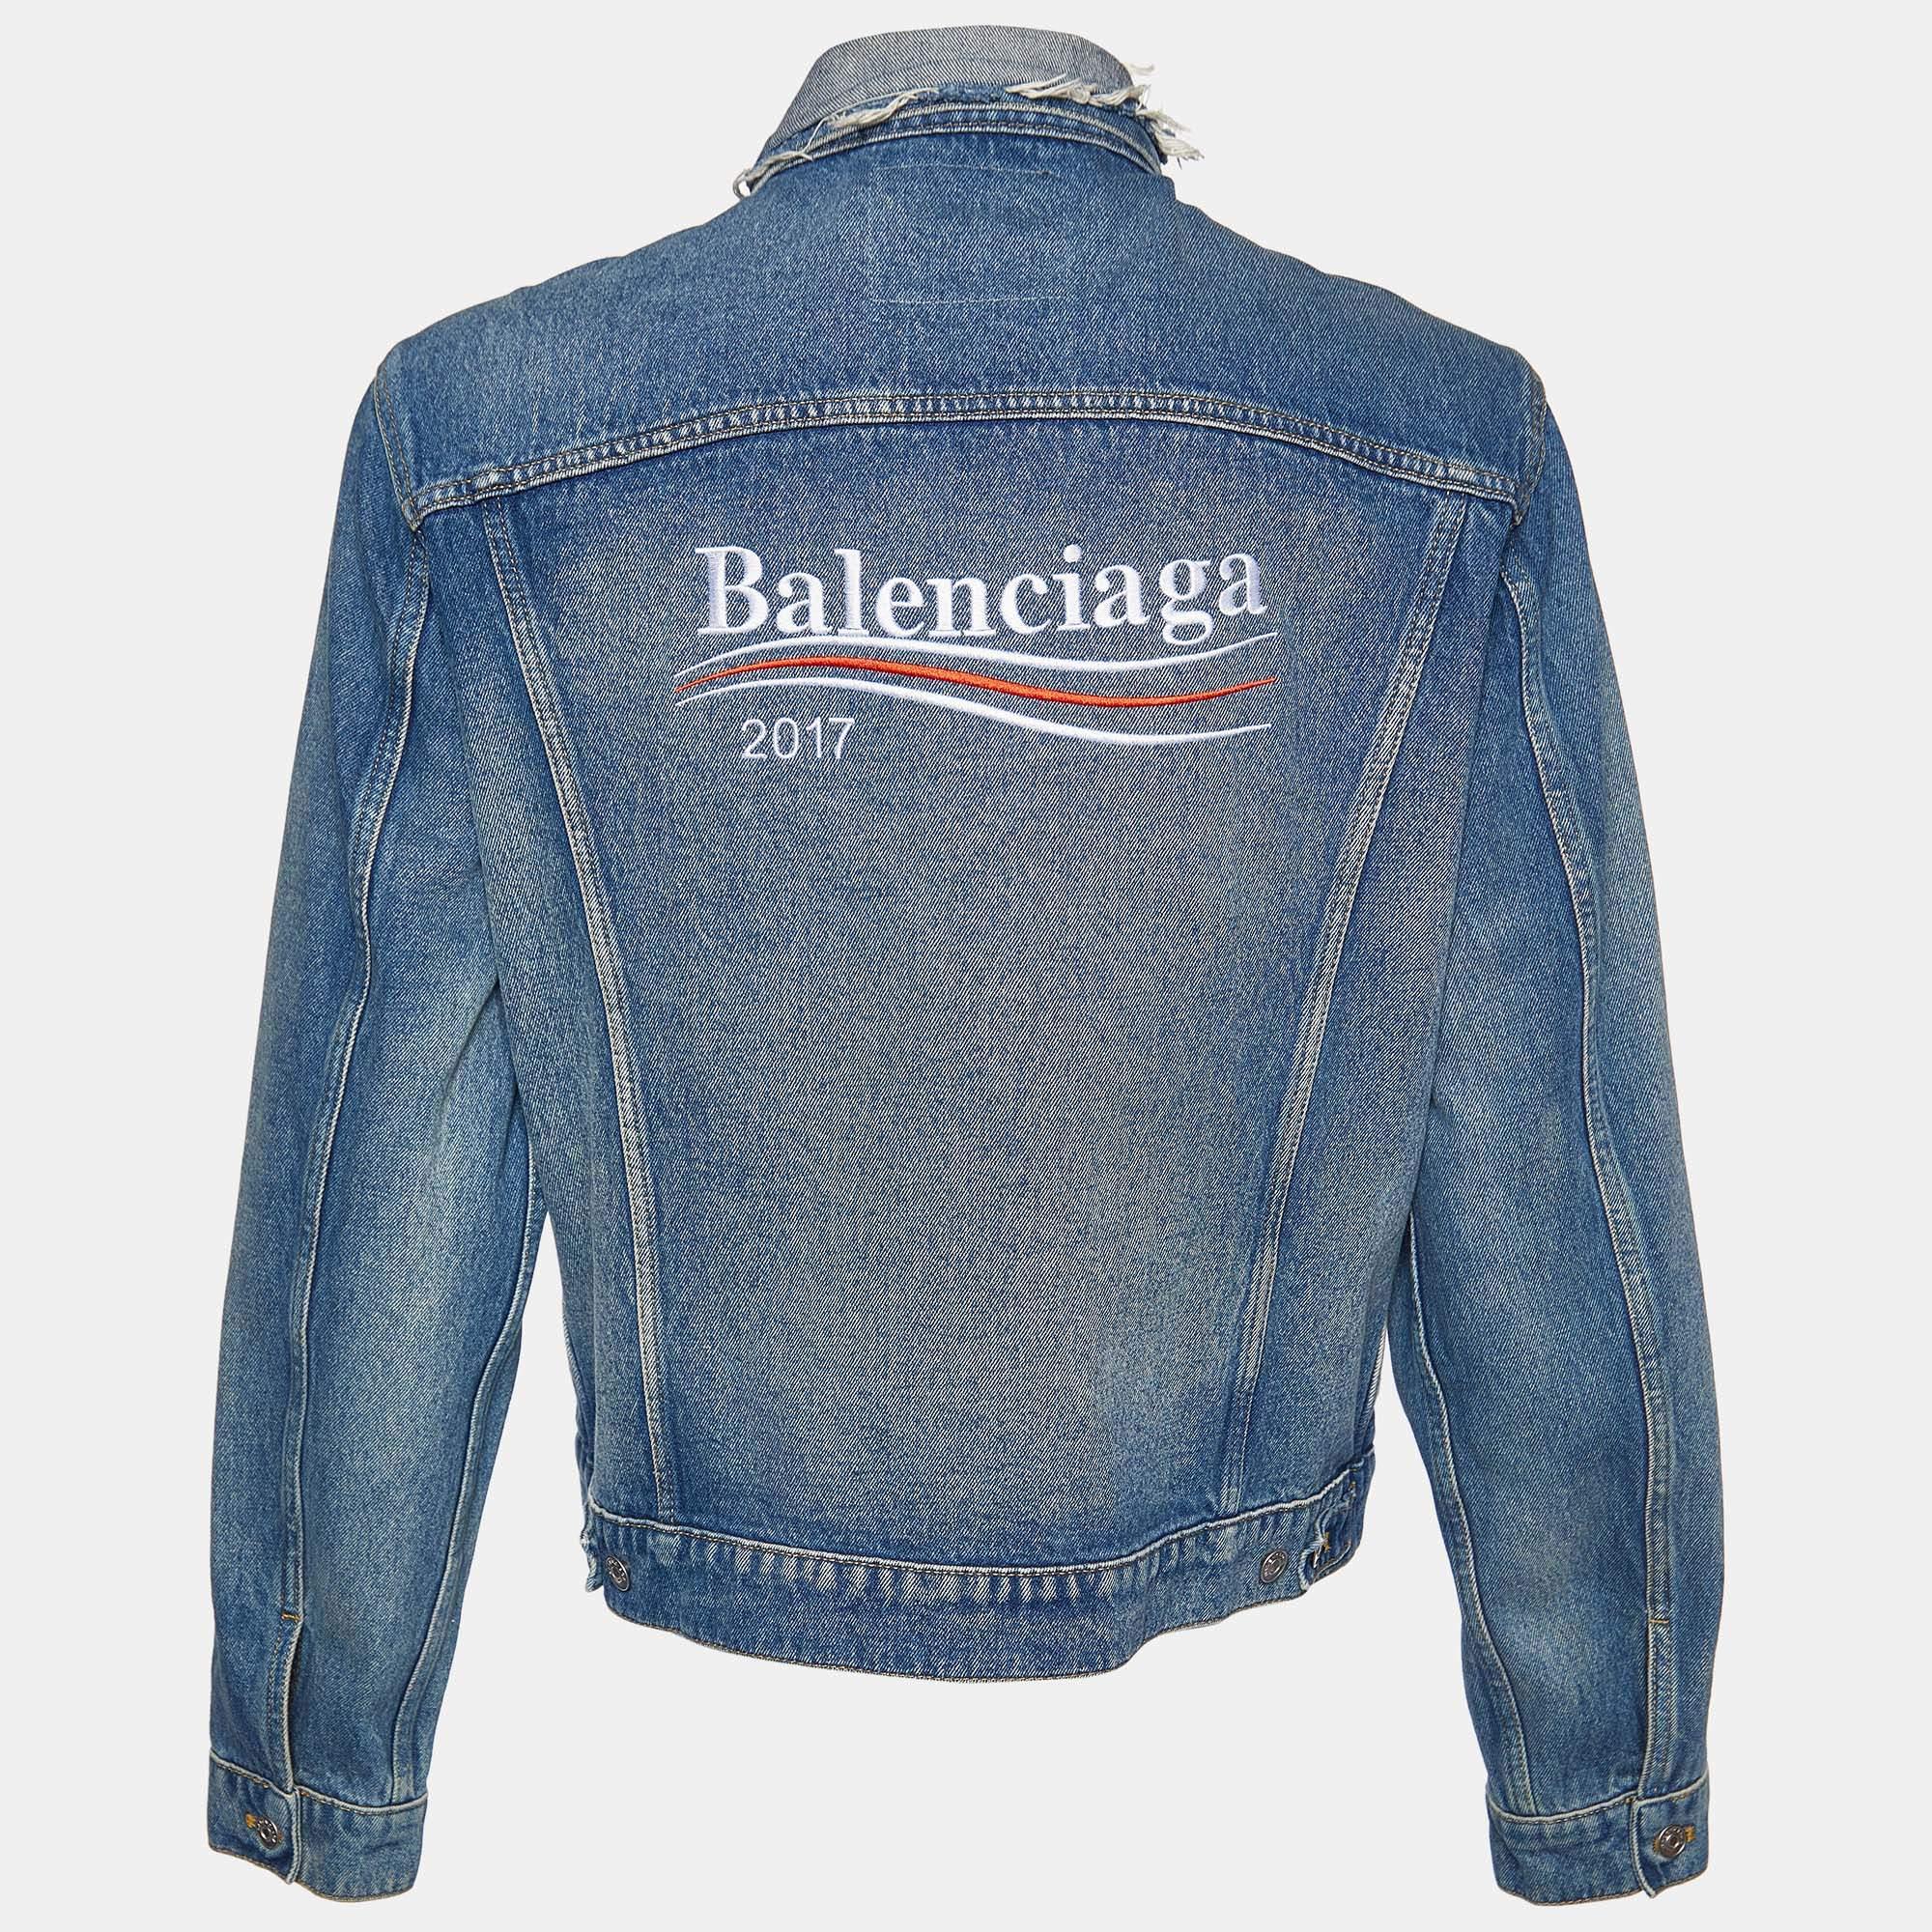 The Balenciaga jacket effortlessly blends urban edge with high-fashion finesse. Crafted from premium distressed denim, its relaxed silhouette exudes contemporary cool. The iconic Balenciaga logo is meticulously embroidered, adding a touch of luxury